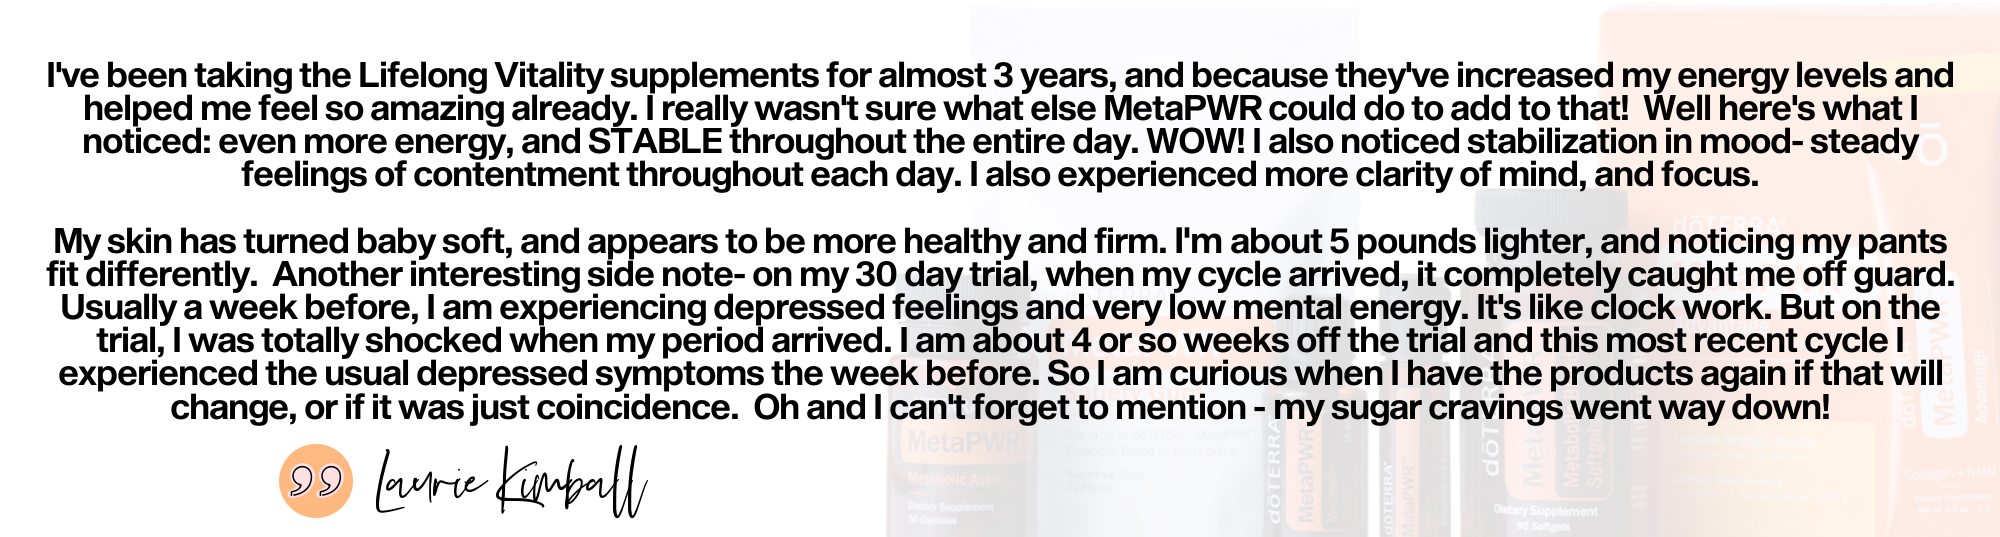 metapwr testimonial Laurie.png